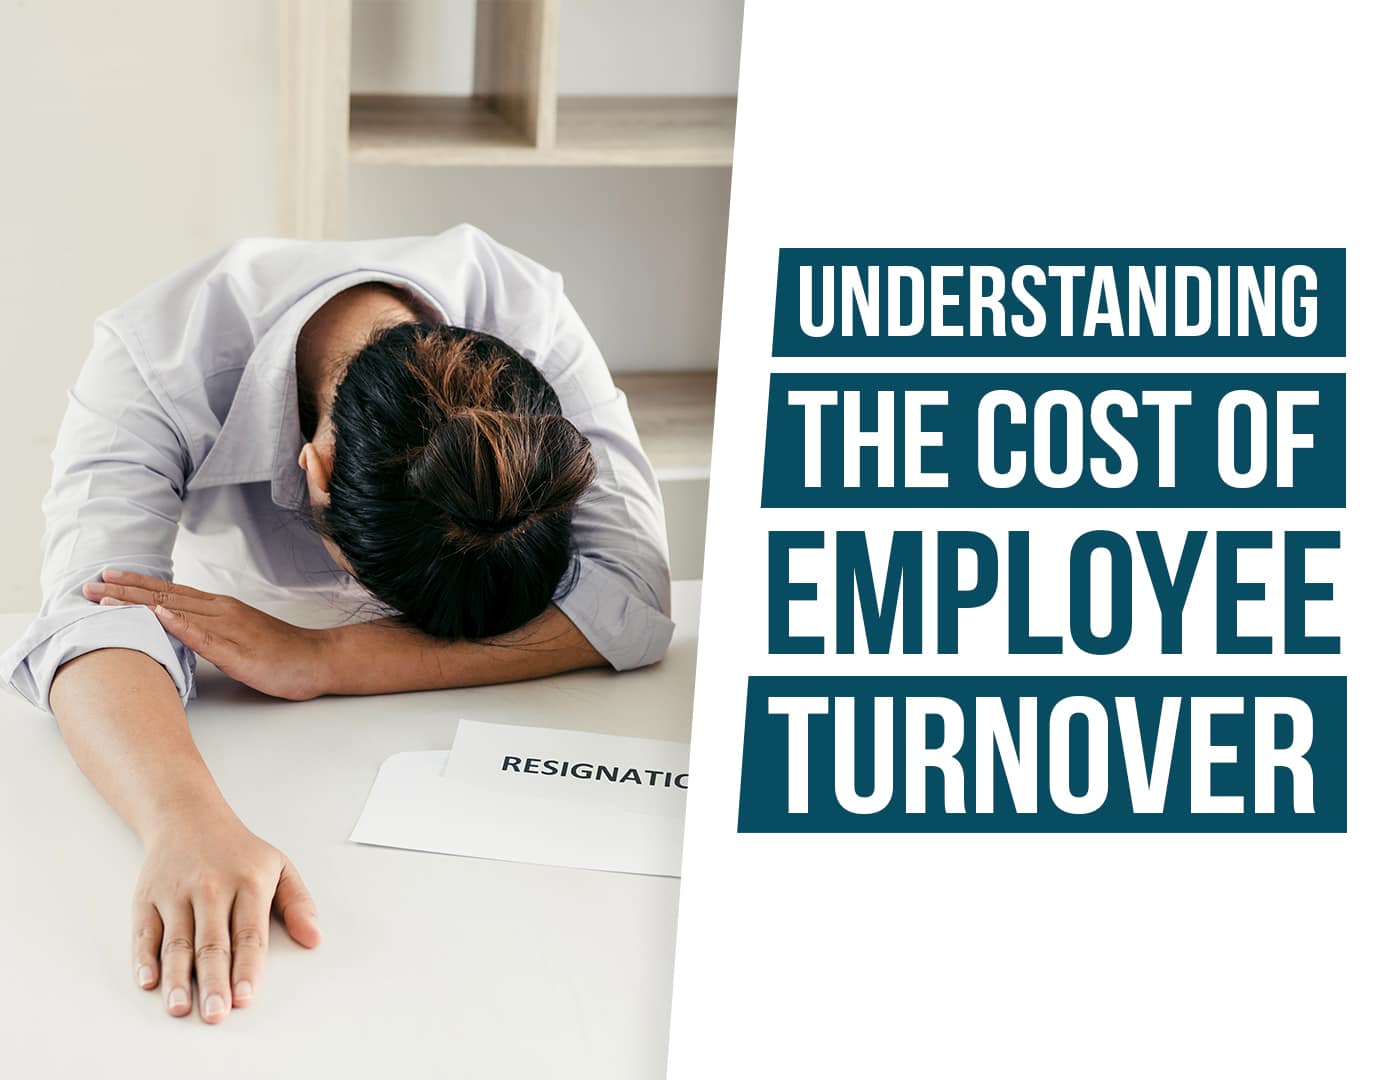 Understanding the cost of employee turnover